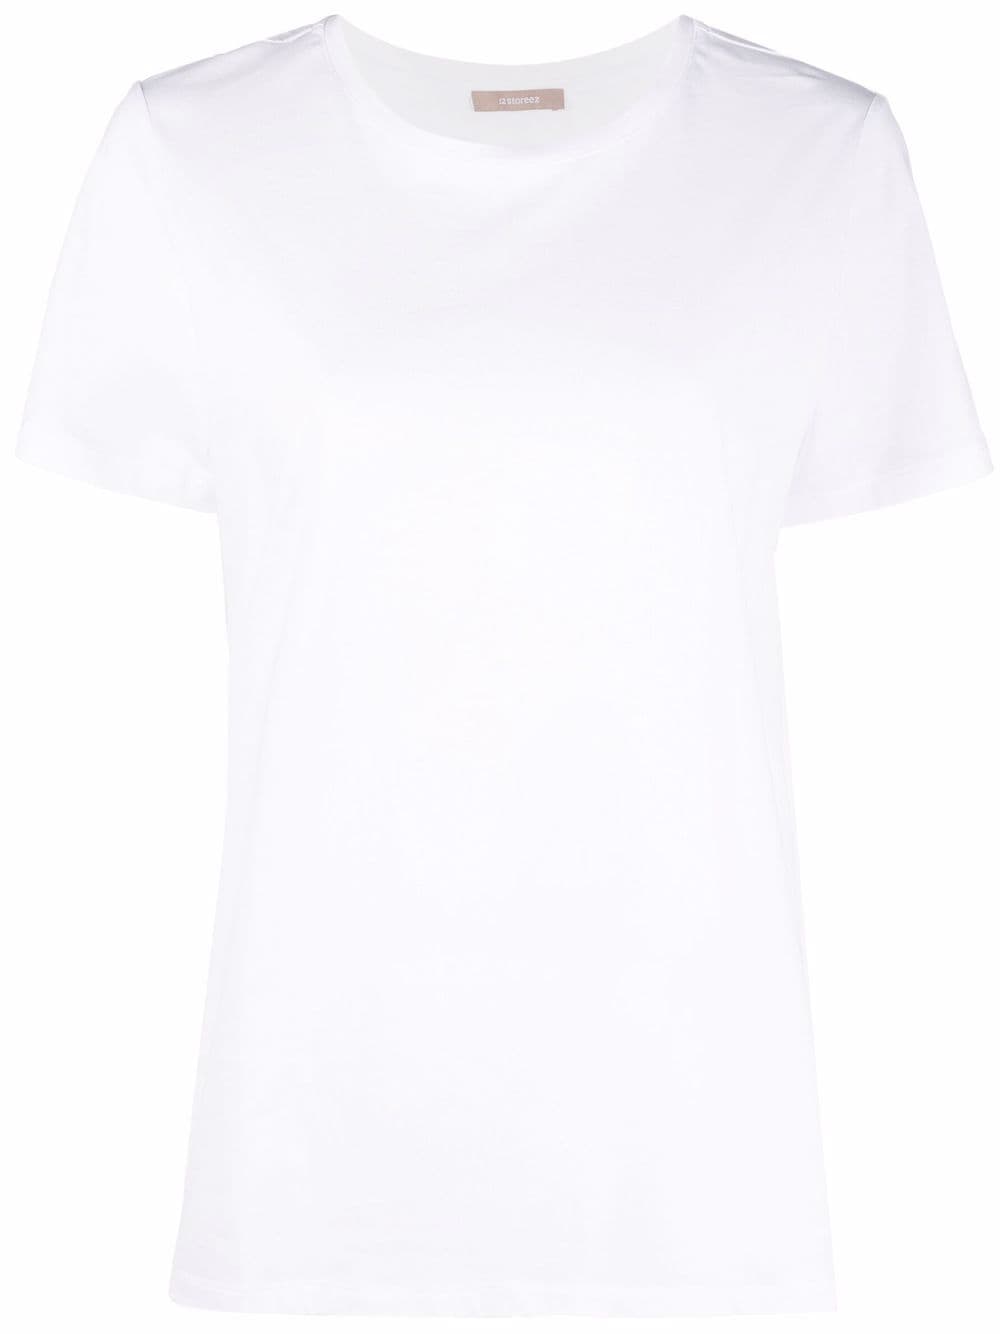 Shop 12 STOREEZ round neck cotton T-shirt with Express Delivery - FARFETCH